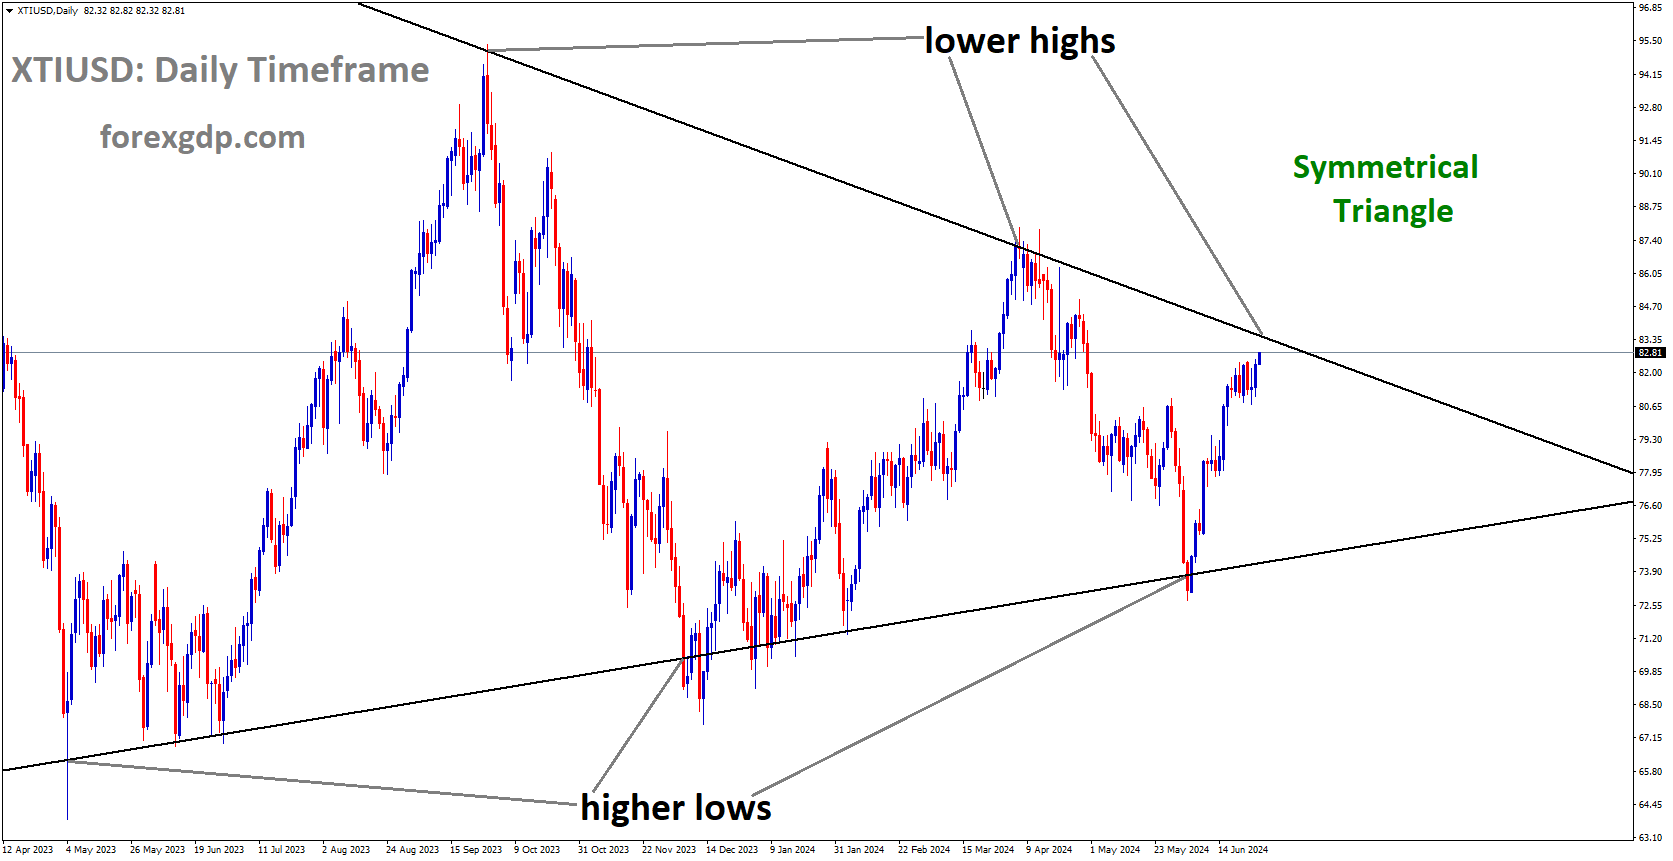 XTIUSD is moving in Symmetrical Triangle and market has reached lower high area of the pattern